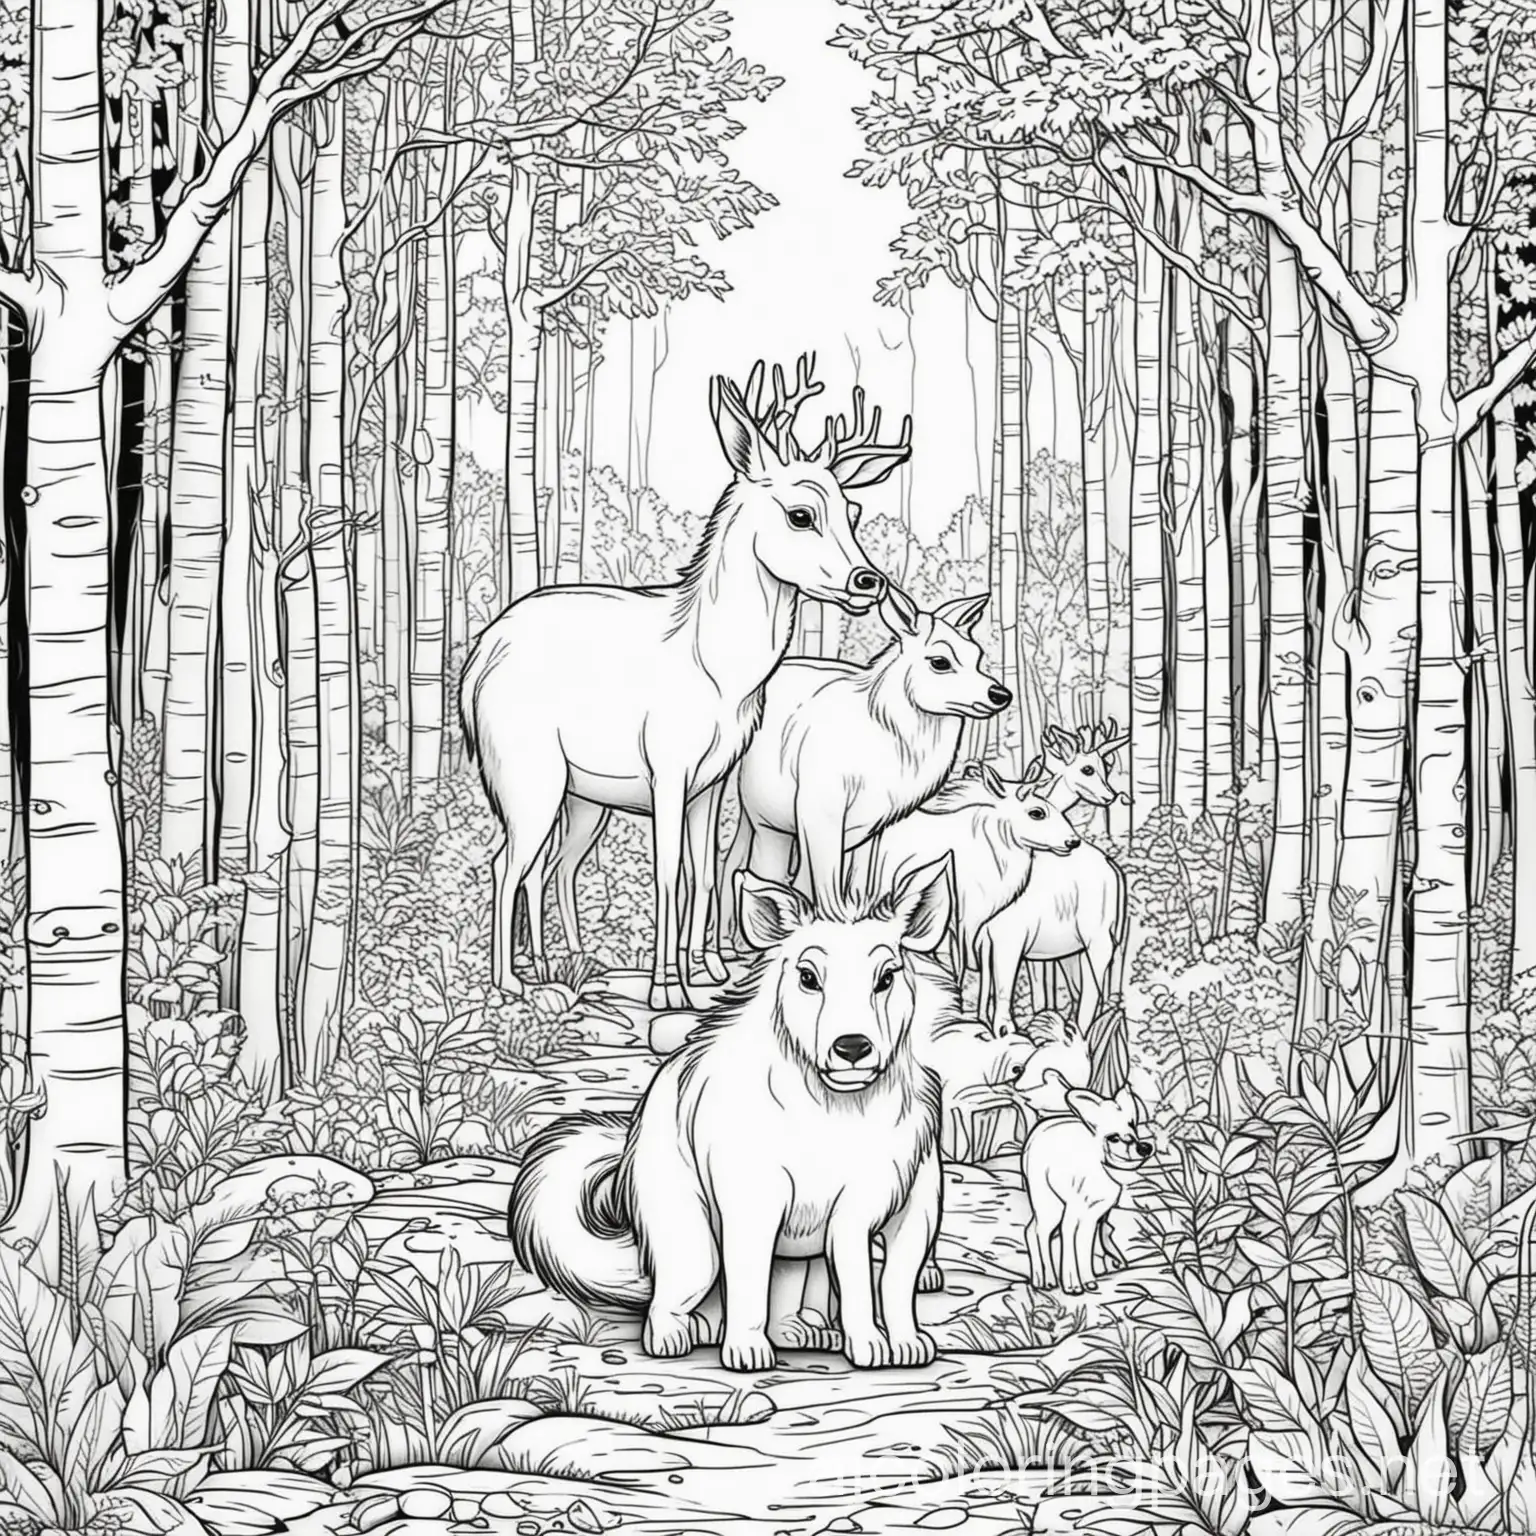 SHOW ME THE vector IMAGE OF ANIMALS in a forest, Coloring Page, black and white, line art, white background, Simplicity, Ample White Space. The background of the coloring page is plain white to make it easy for young children to color within the lines. The outlines of all the subjects are easy to distinguish, making it simple for kids to color without too much difficulty